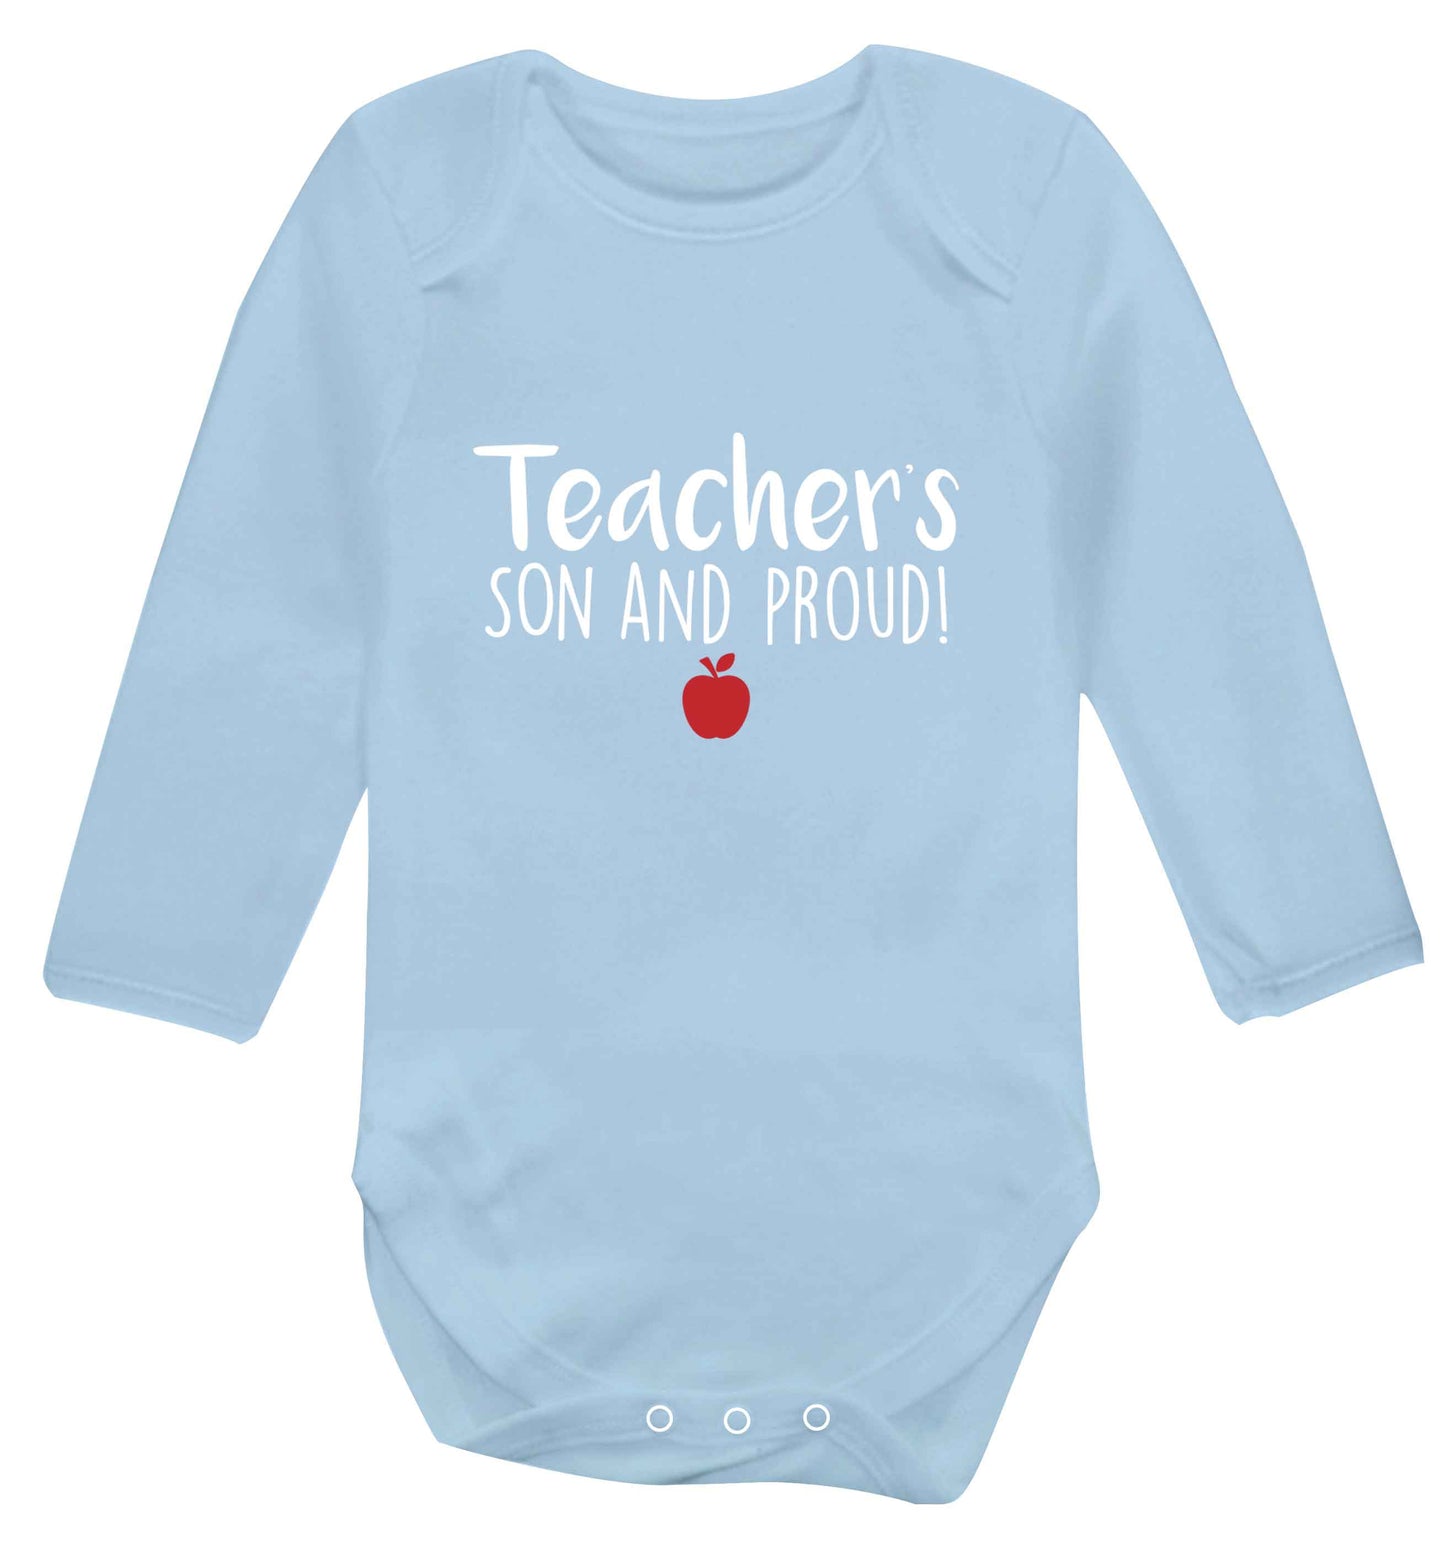 Teachers son and proud baby vest long sleeved pale blue 6-12 months